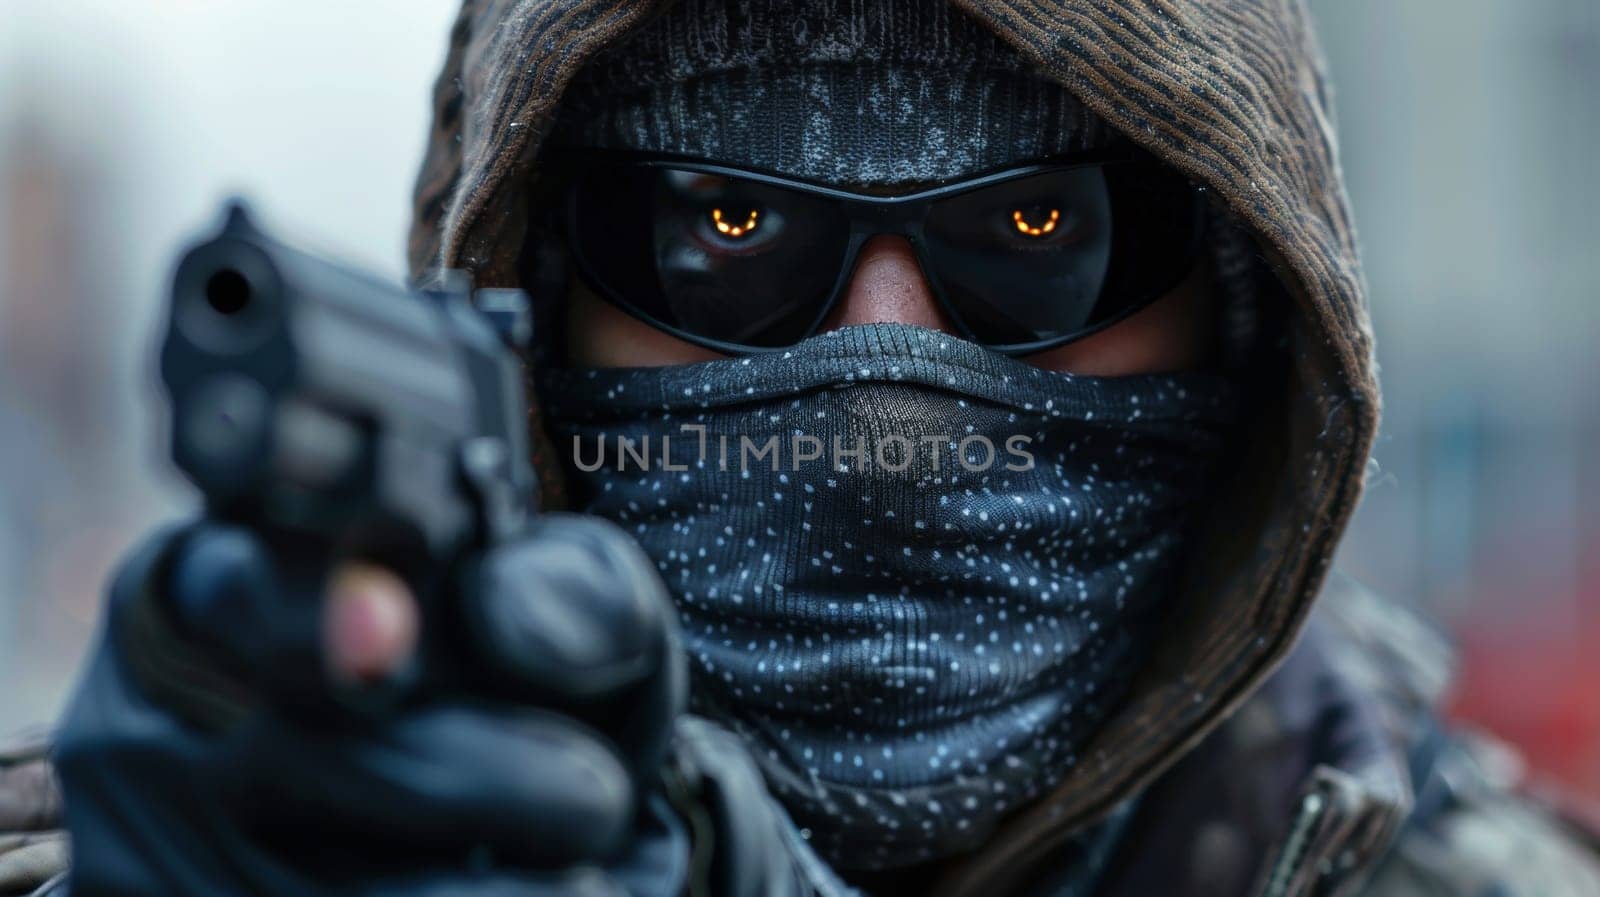 A man in a mask holding up his gun with glowing eyes